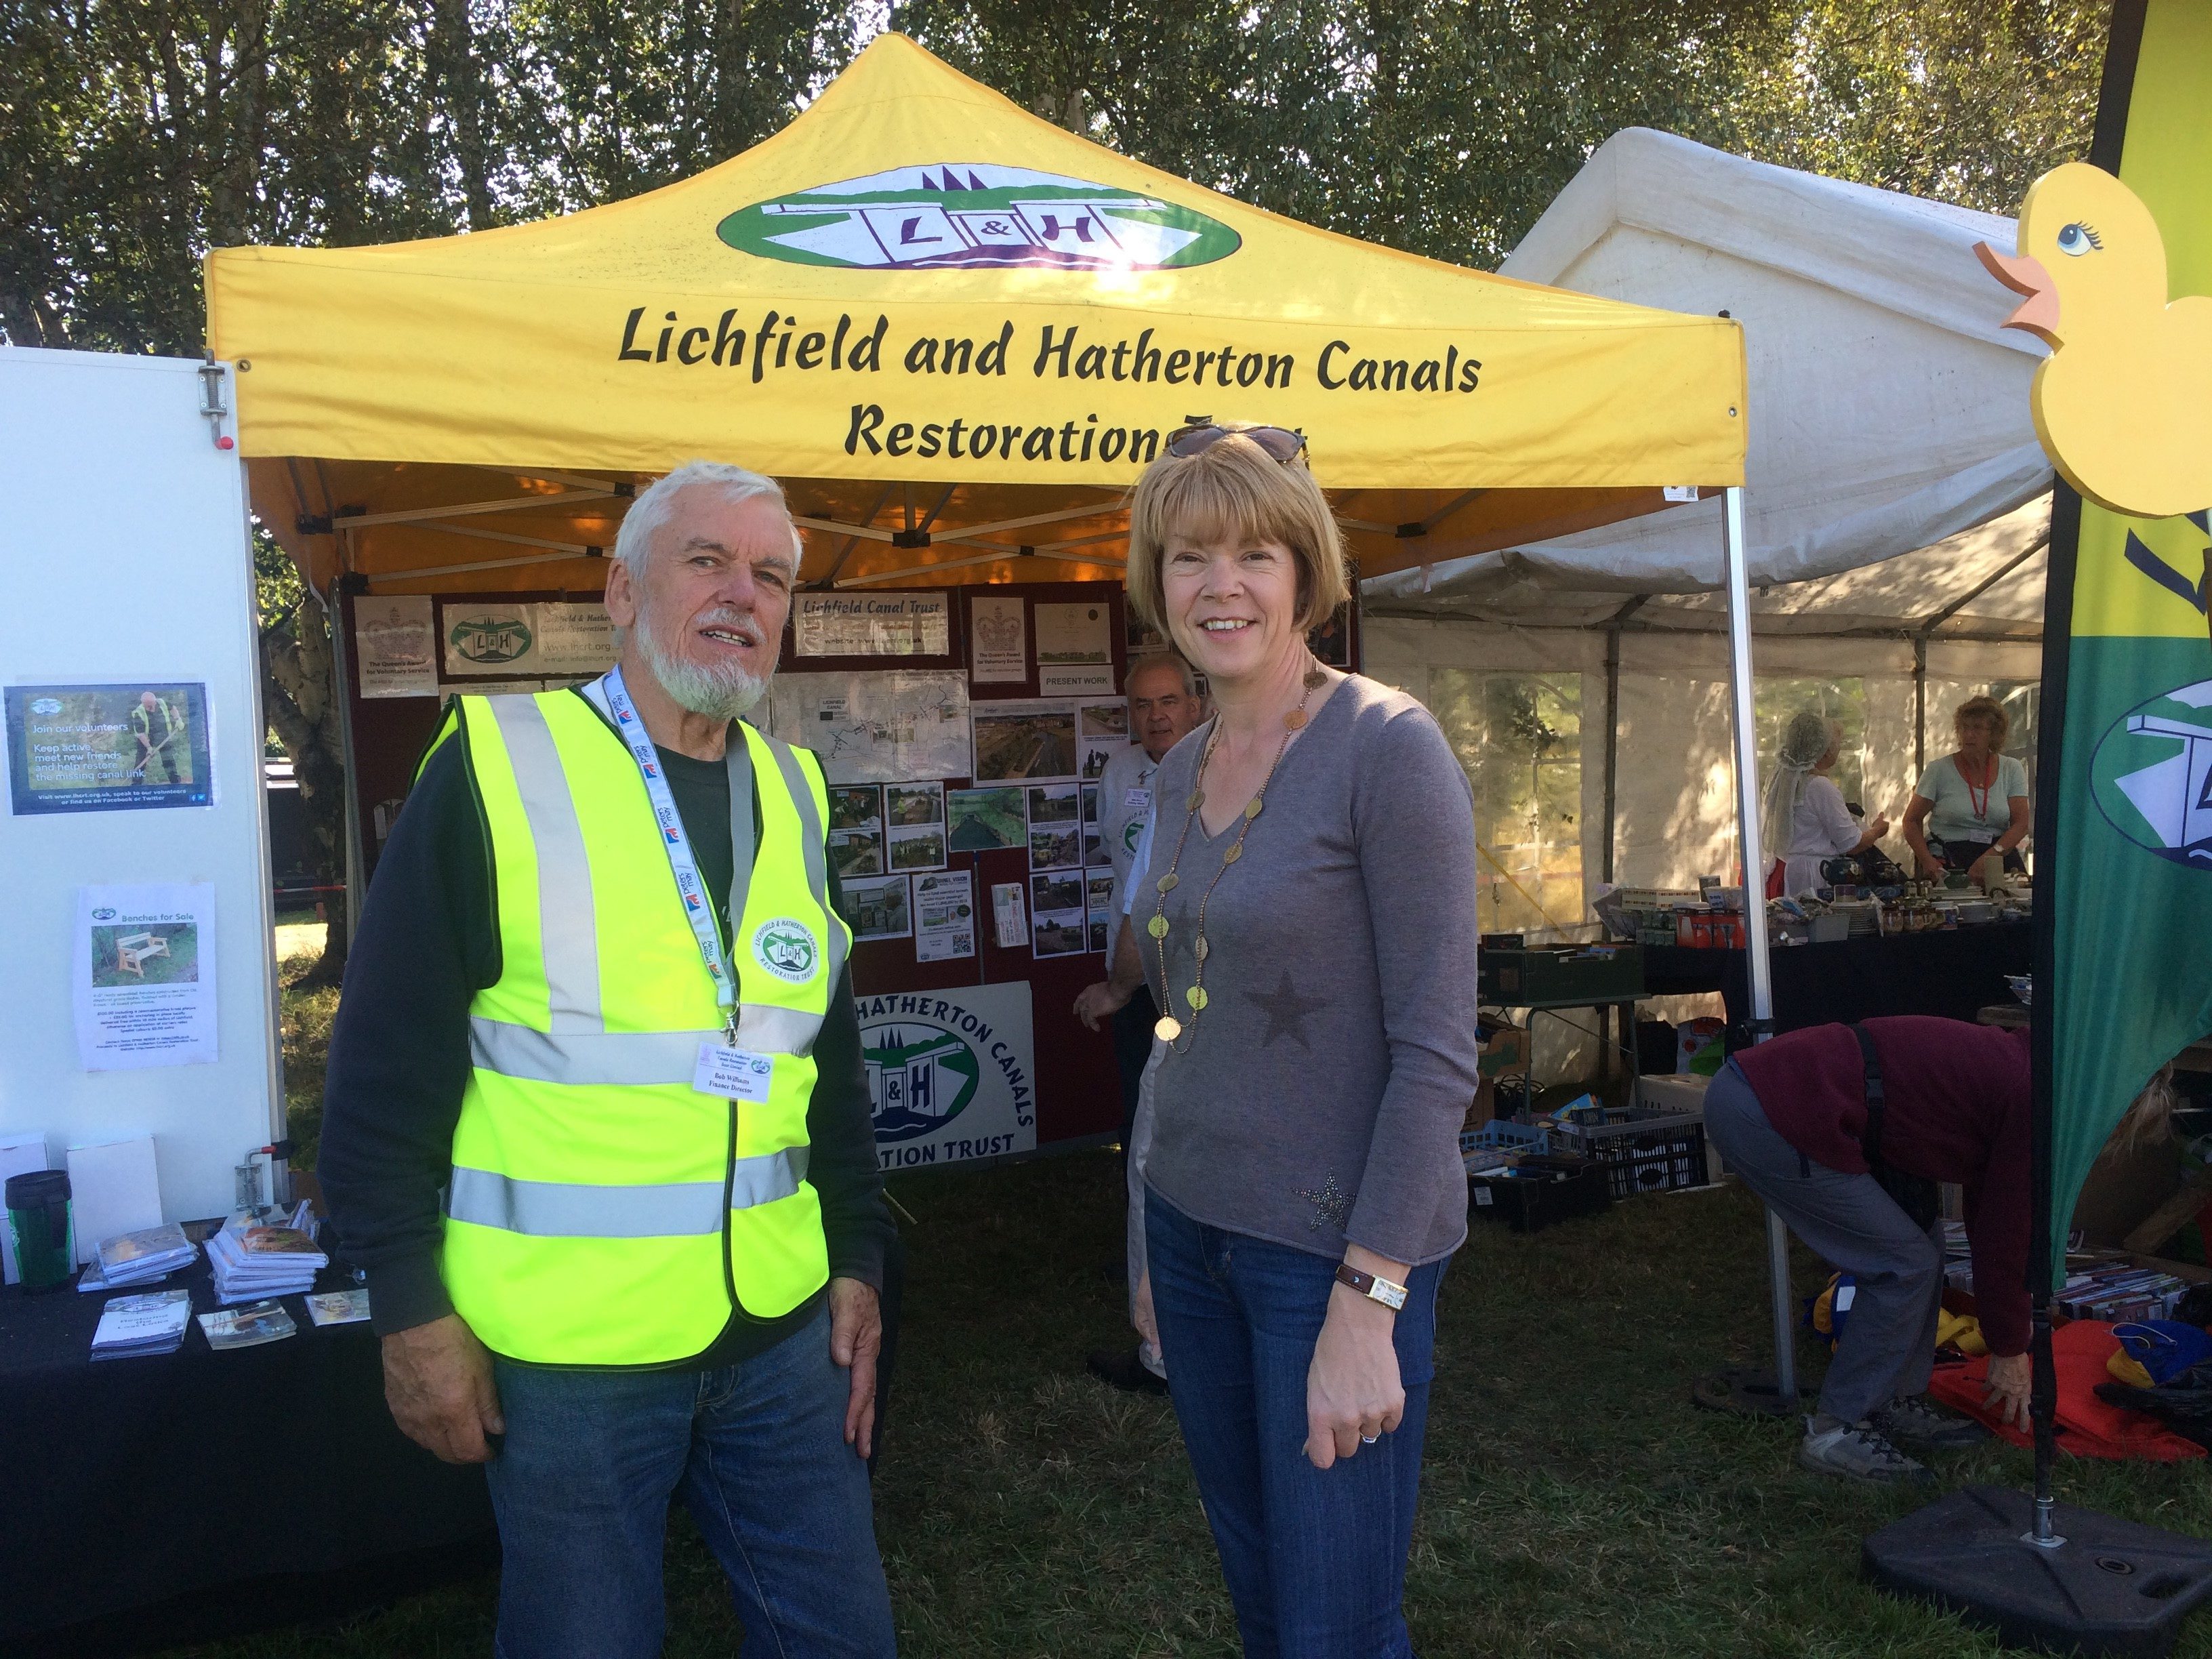 A Visit to the Lichfield and Hatherton Canals Restoration Trust!